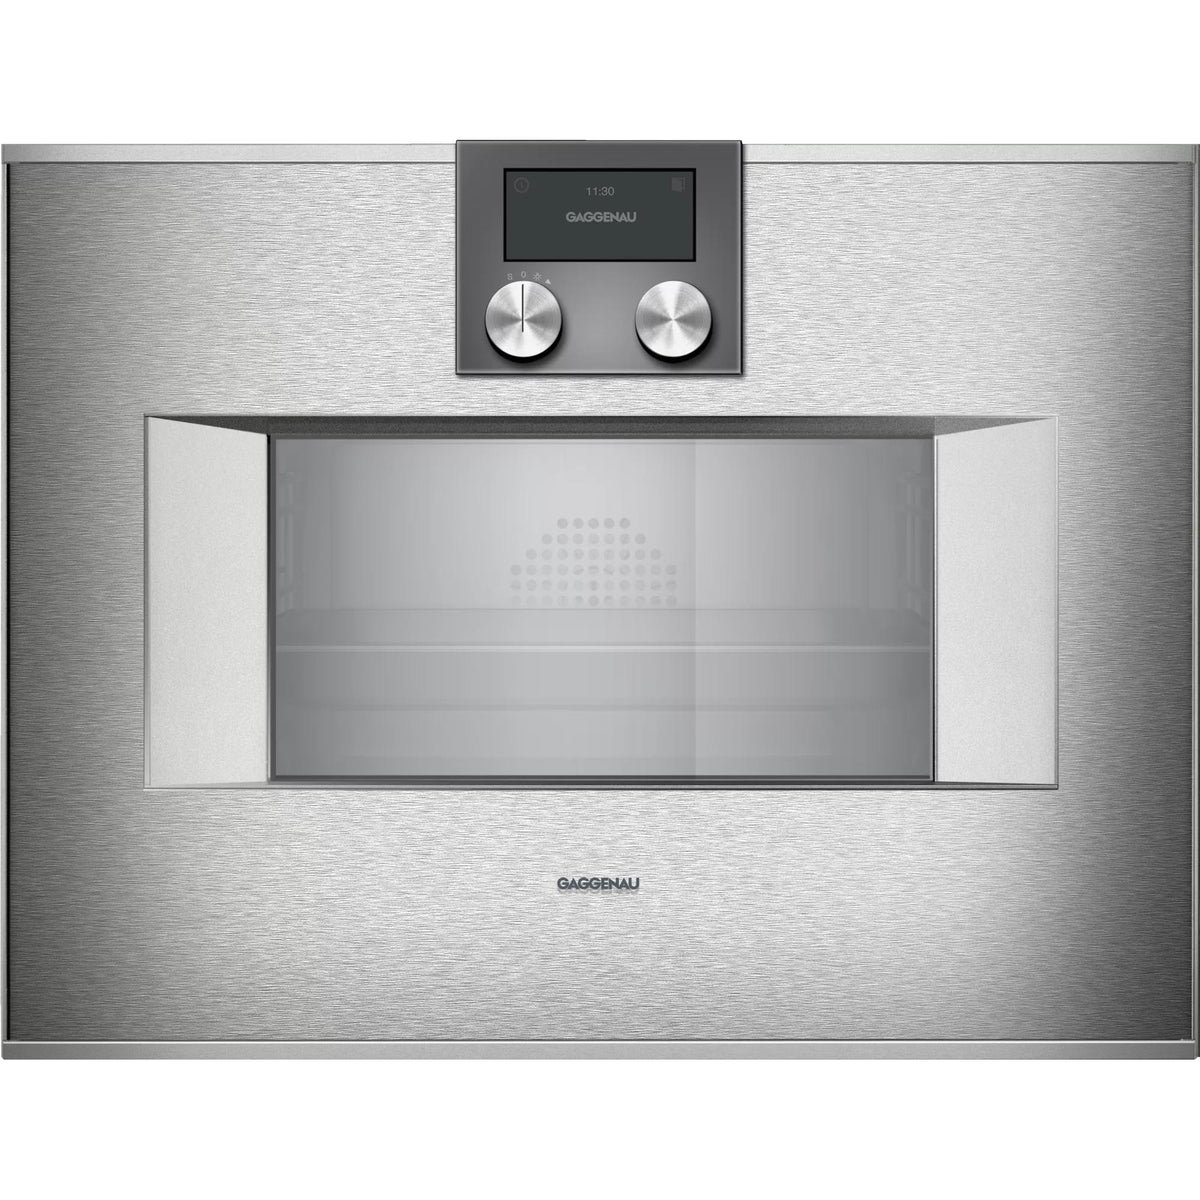 24-inch, 2.1 cu.ft. Built-in Single Wall Oven with Steam Convection BS471612 IMAGE 1